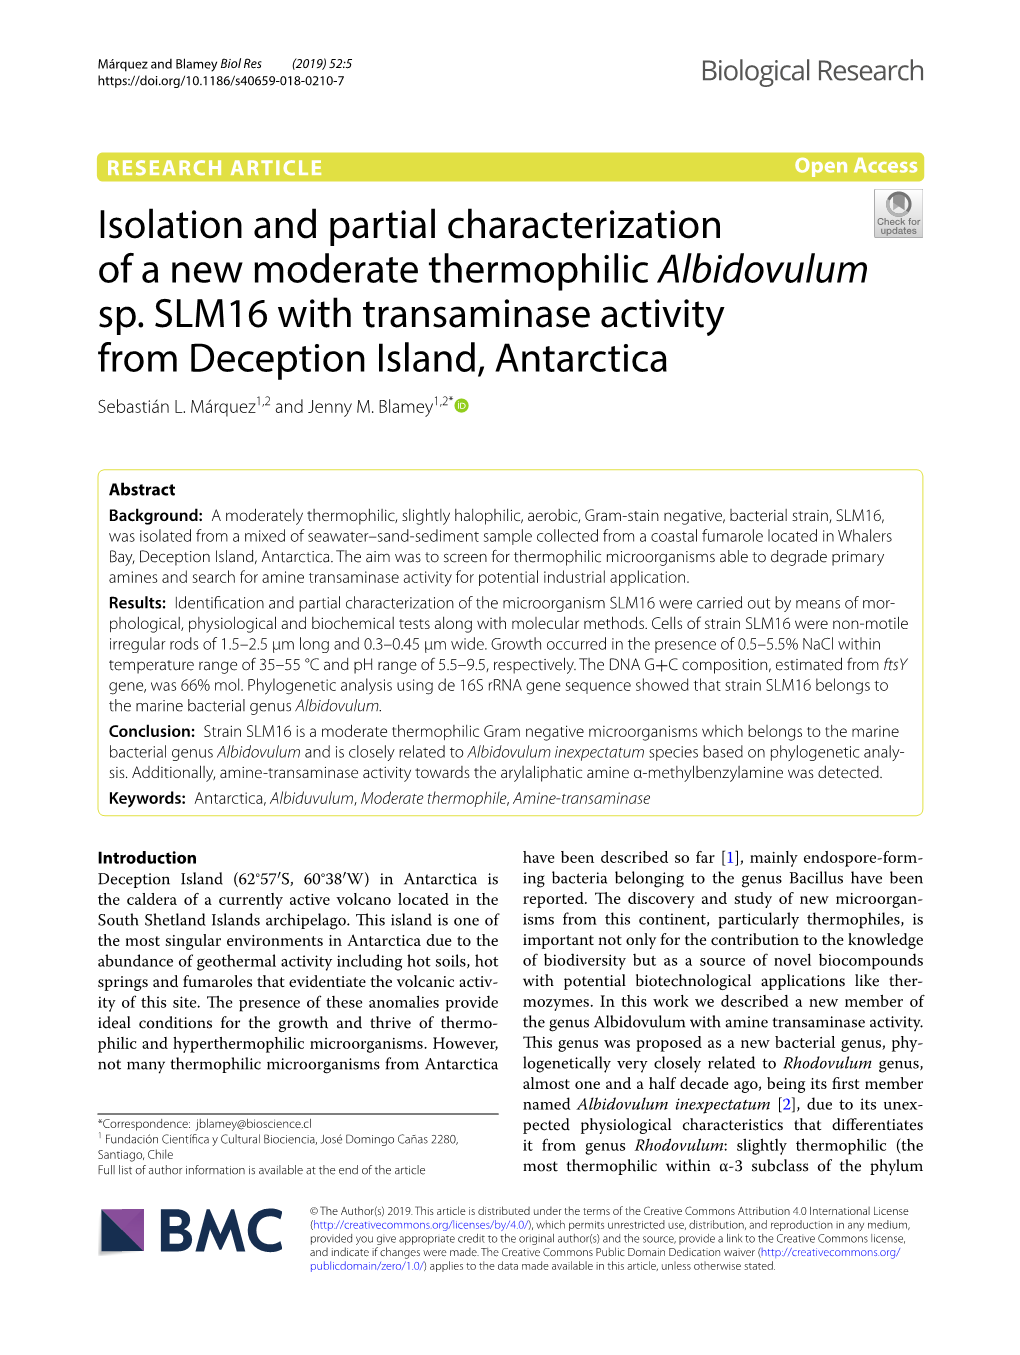 Isolation and Partial Characterization of a New Moderate Thermophilic Albidovulum Sp. SLM16 with Transaminase Activity from Deception Island, Antarctica Sebastián L